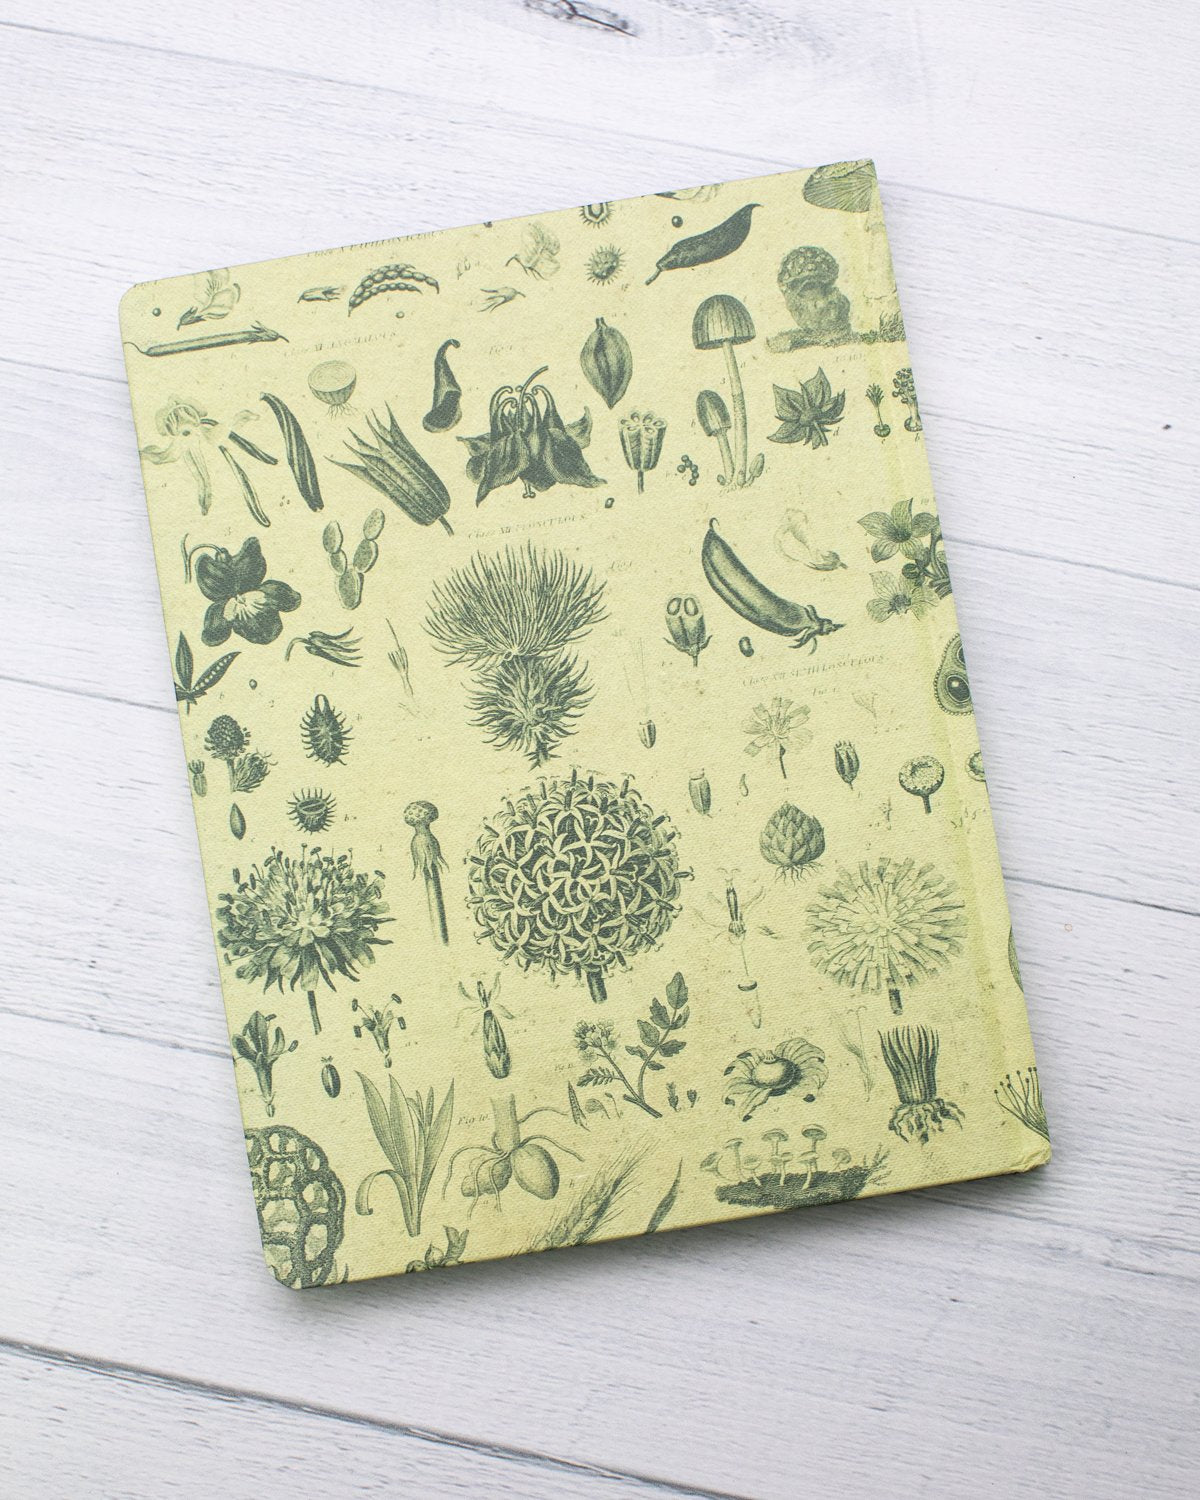 Plants & Fungi Hardcover Notebook - Lined/Grid